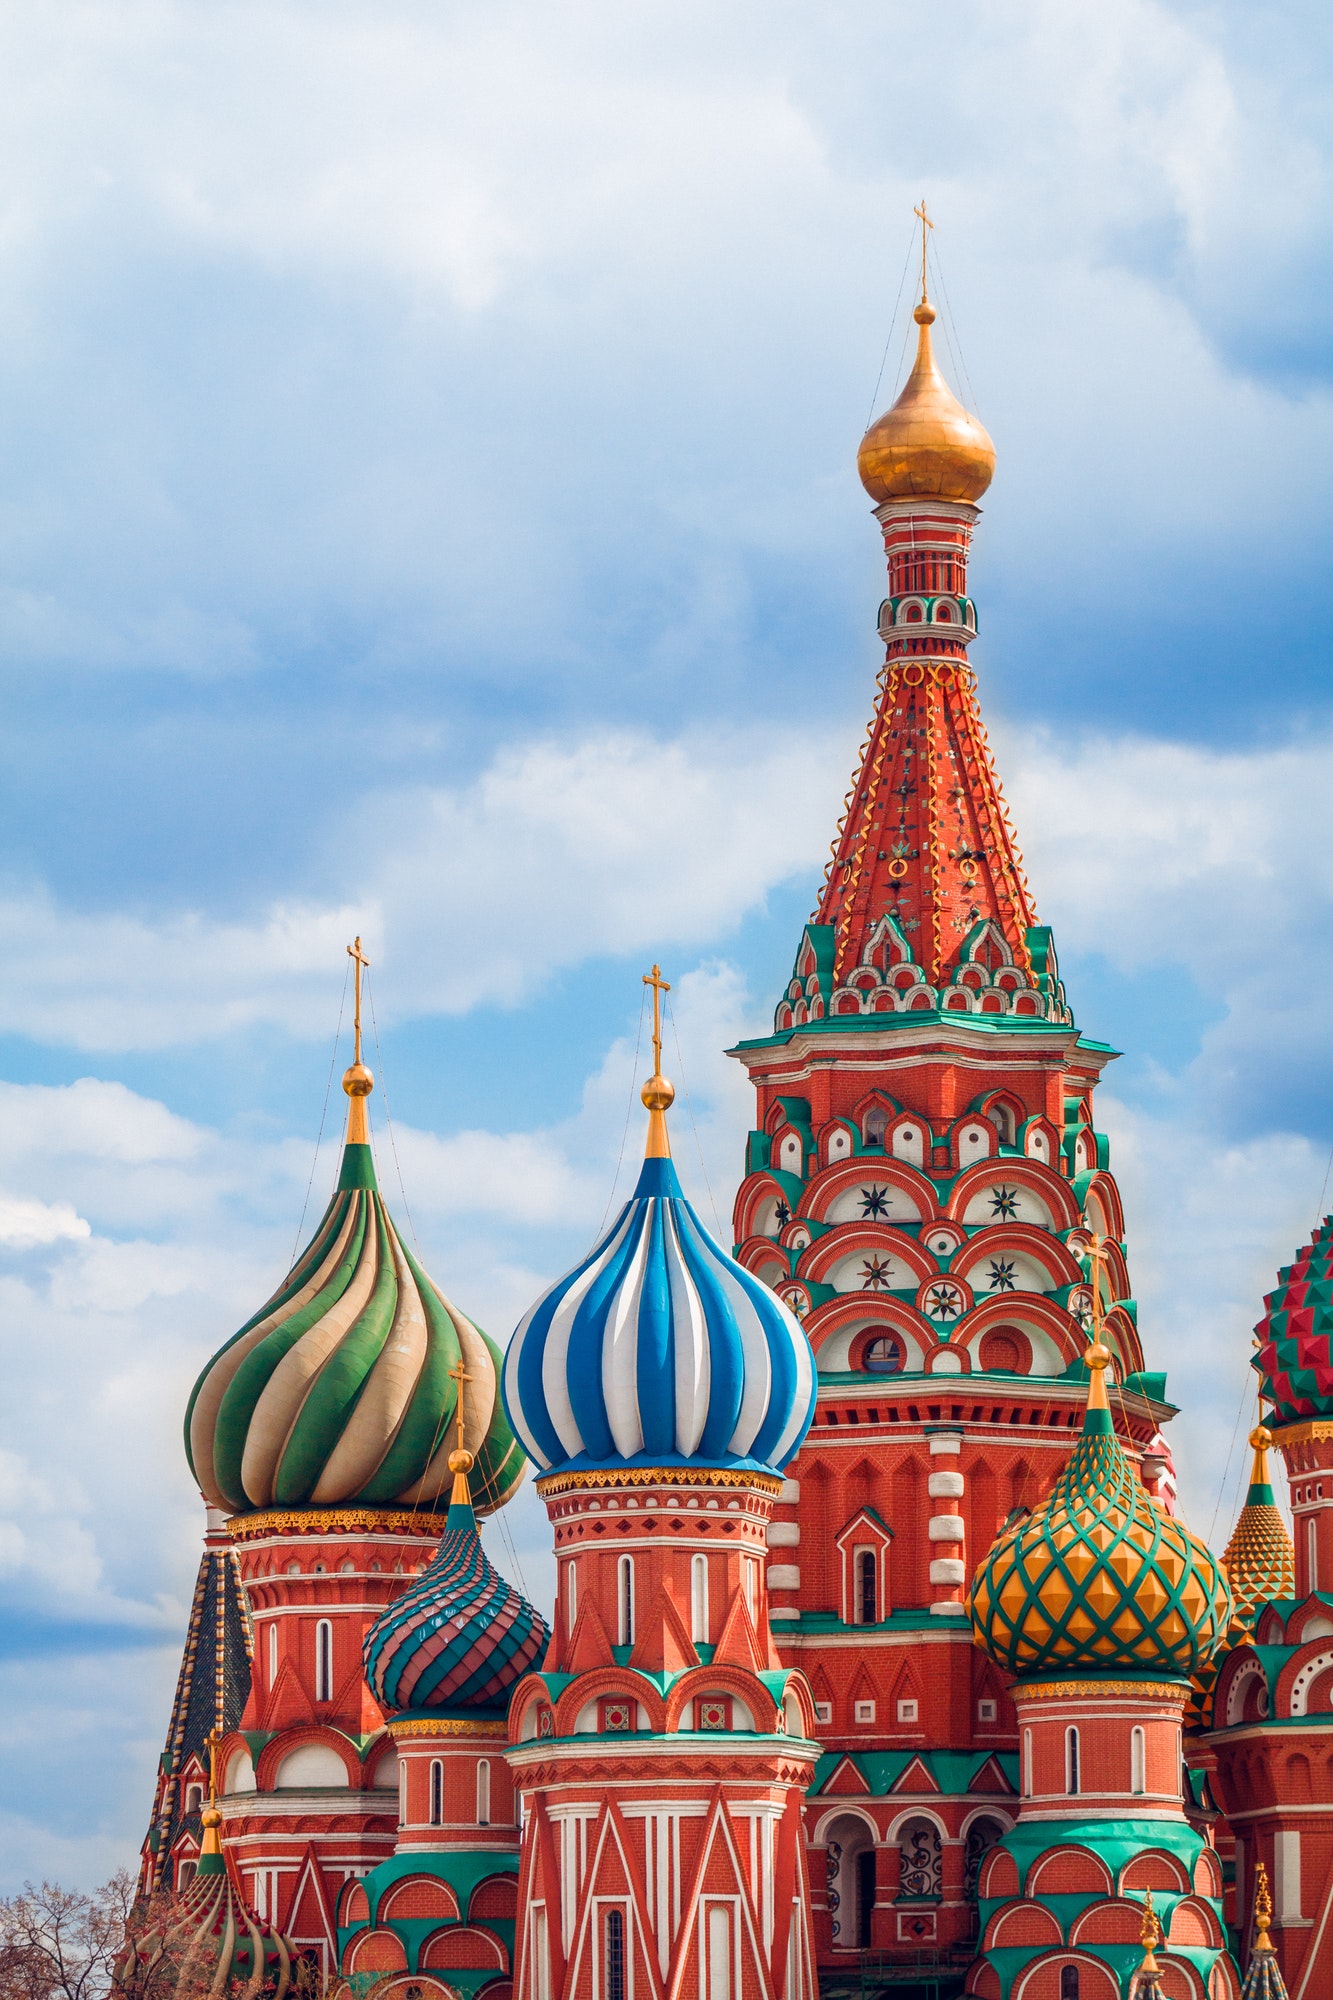 Details of the famous historical sights of St. Basil's Cathedral in Moscow, Russia.